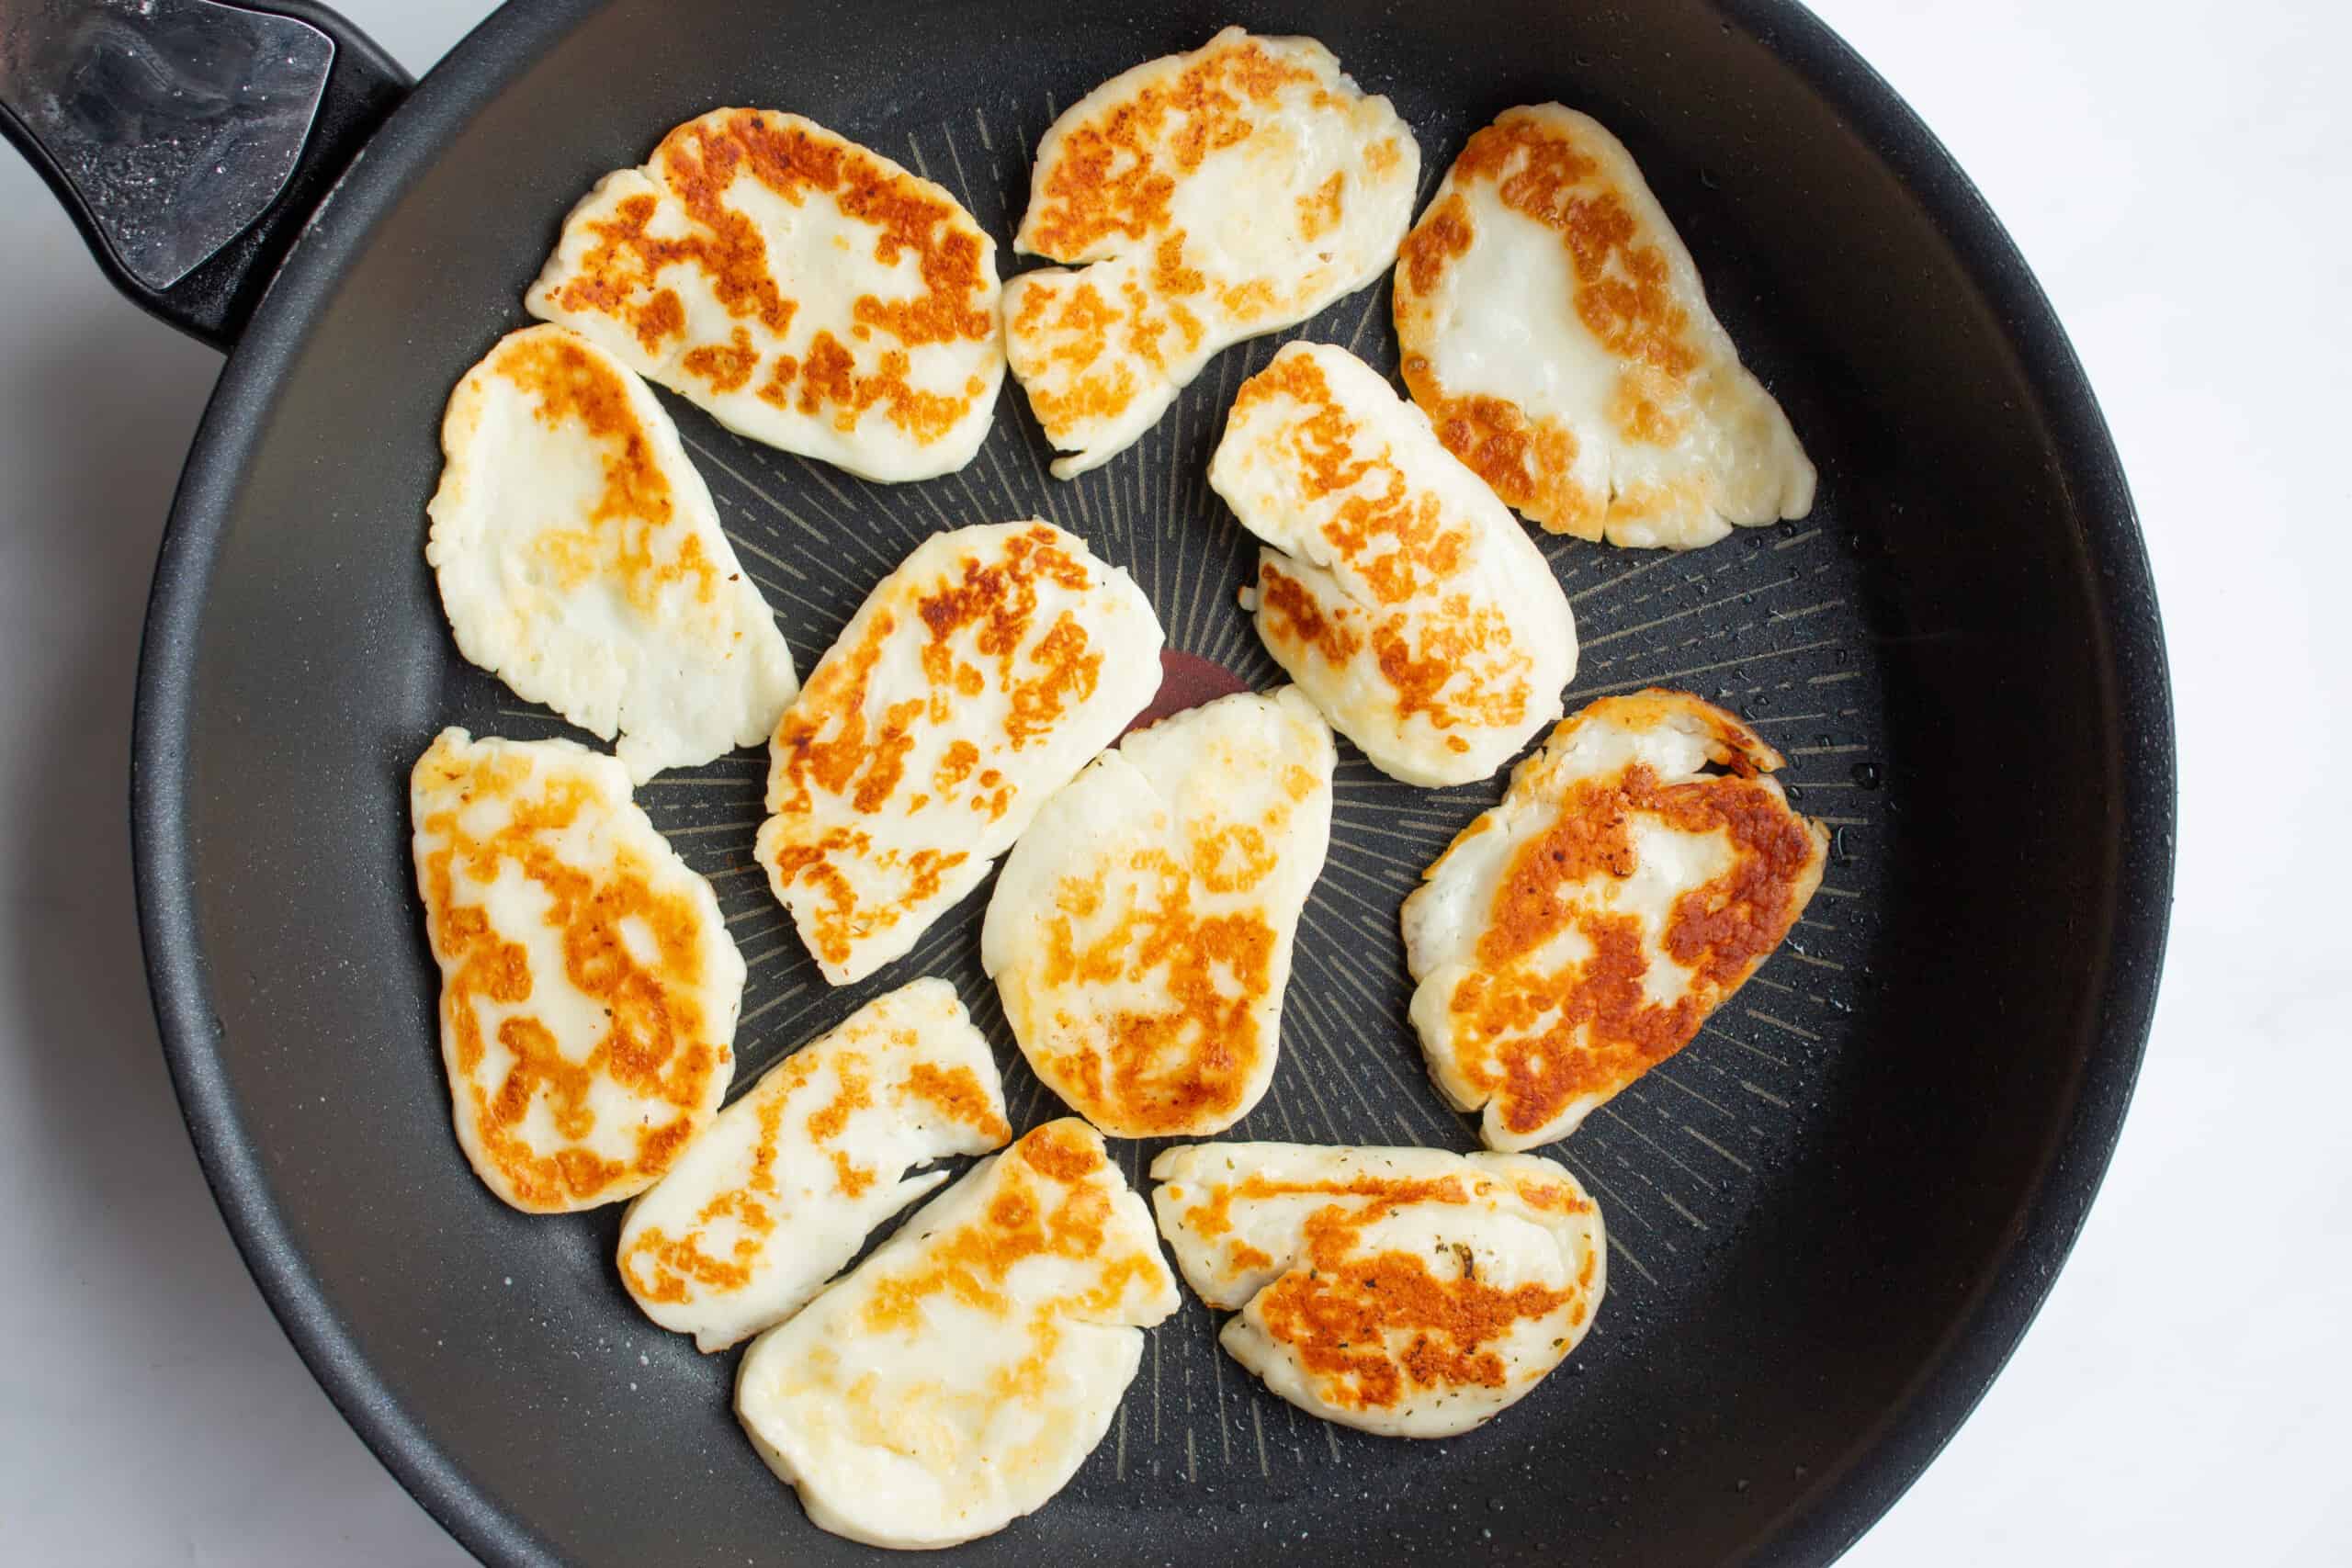 Golden browned halloumi slices fried in a black pan.